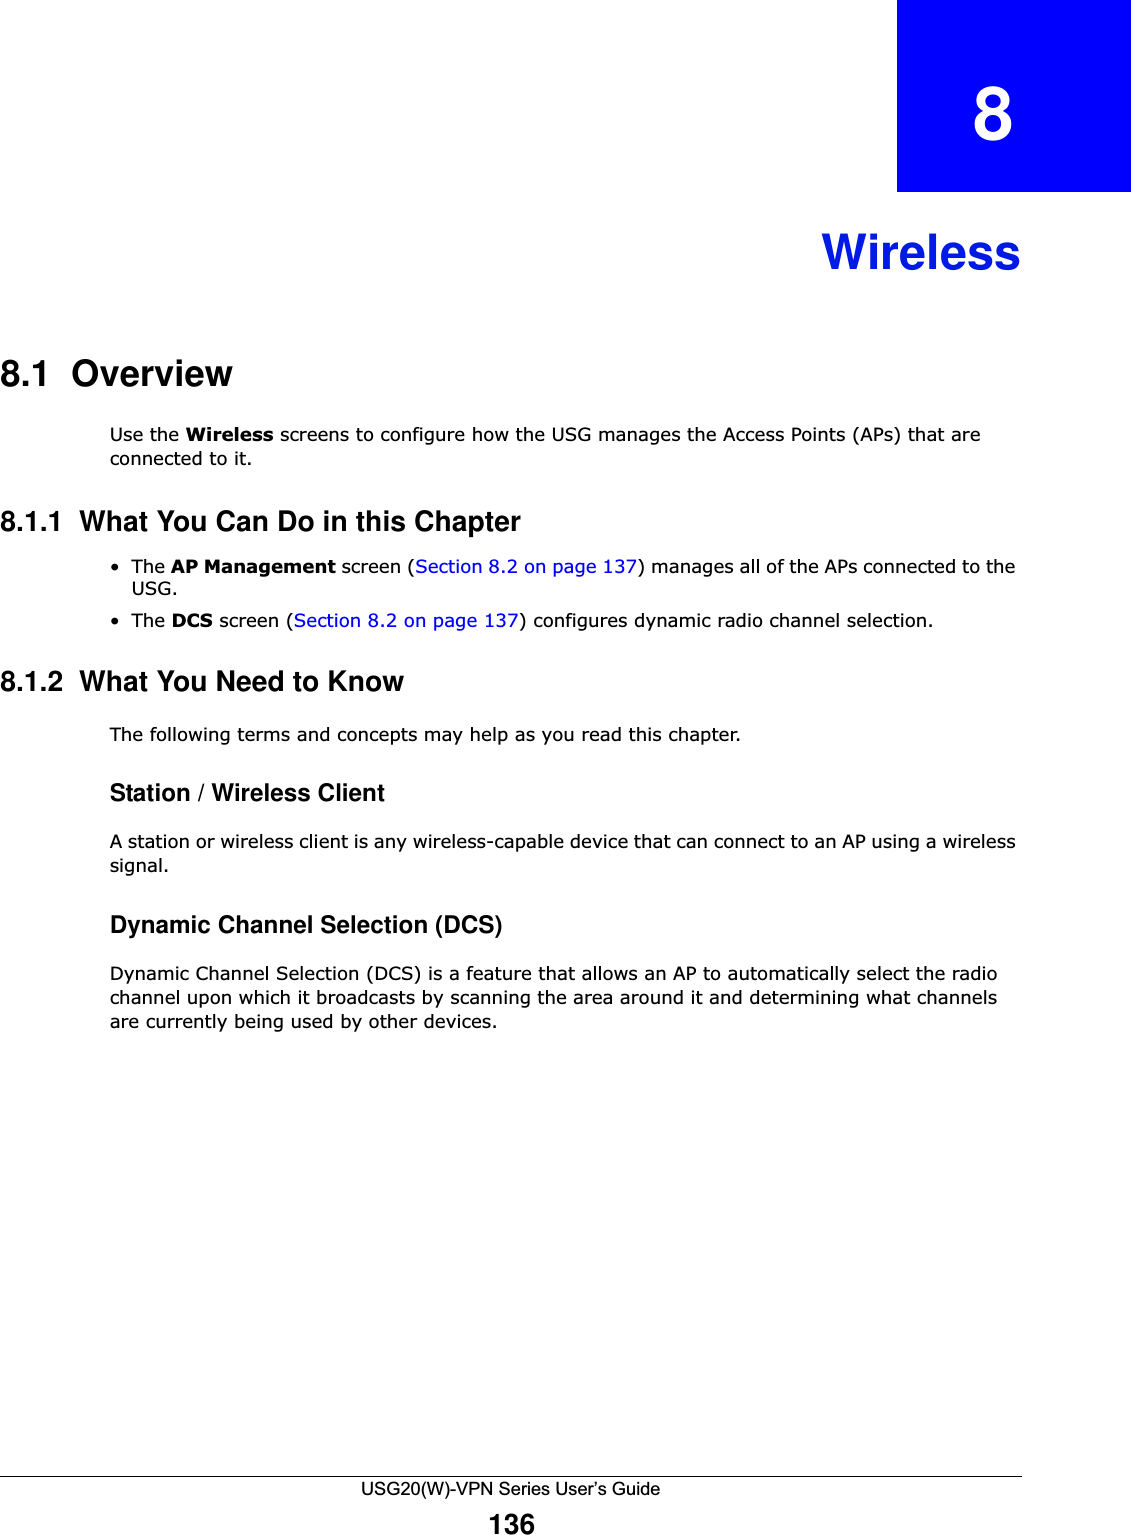 USG20(W)-VPN Series User’s Guide136CHAPTER   8Wireless8.1  OverviewUse the Wireless screens to configure how the USG manages the Access Points (APs) that are connected to it. 8.1.1  What You Can Do in this Chapter•The AP Management screen (Section 8.2 on page 137) manages all of the APs connected to the USG.•The DCS screen (Section 8.2 on page 137) configures dynamic radio channel selection. 8.1.2  What You Need to KnowThe following terms and concepts may help as you read this chapter.Station / Wireless ClientA station or wireless client is any wireless-capable device that can connect to an AP using a wireless signal.Dynamic Channel Selection (DCS)Dynamic Channel Selection (DCS) is a feature that allows an AP to automatically select the radio channel upon which it broadcasts by scanning the area around it and determining what channels are currently being used by other devices.